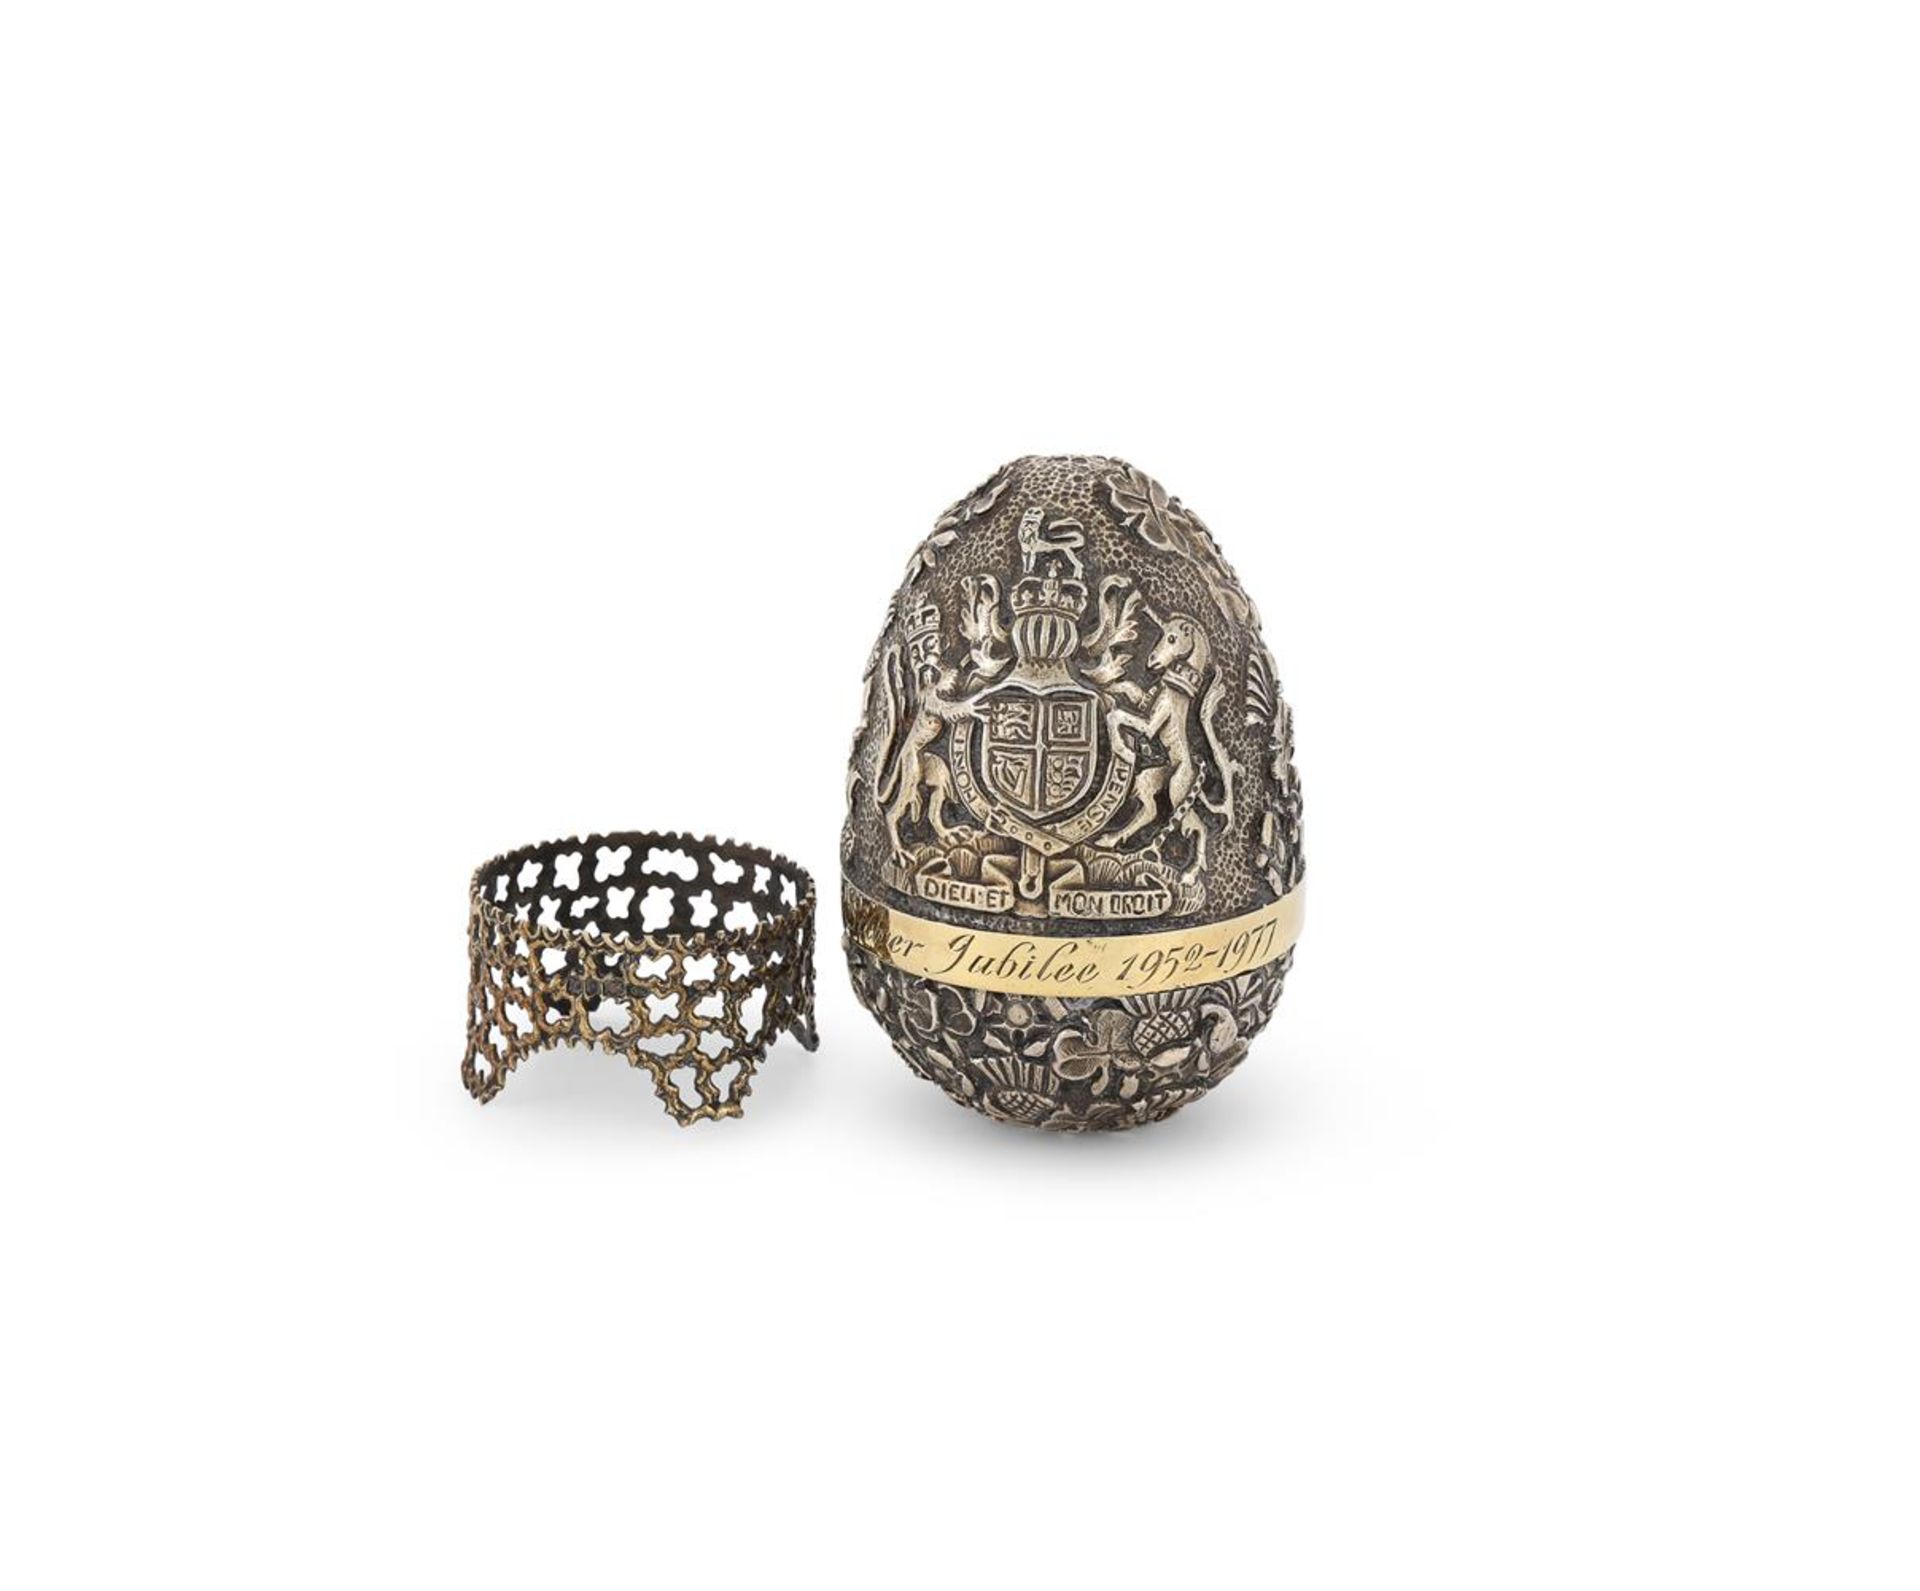 A SILVER GILT AND ENAMEL SURPRISE JUBILEE EGG - Image 2 of 4